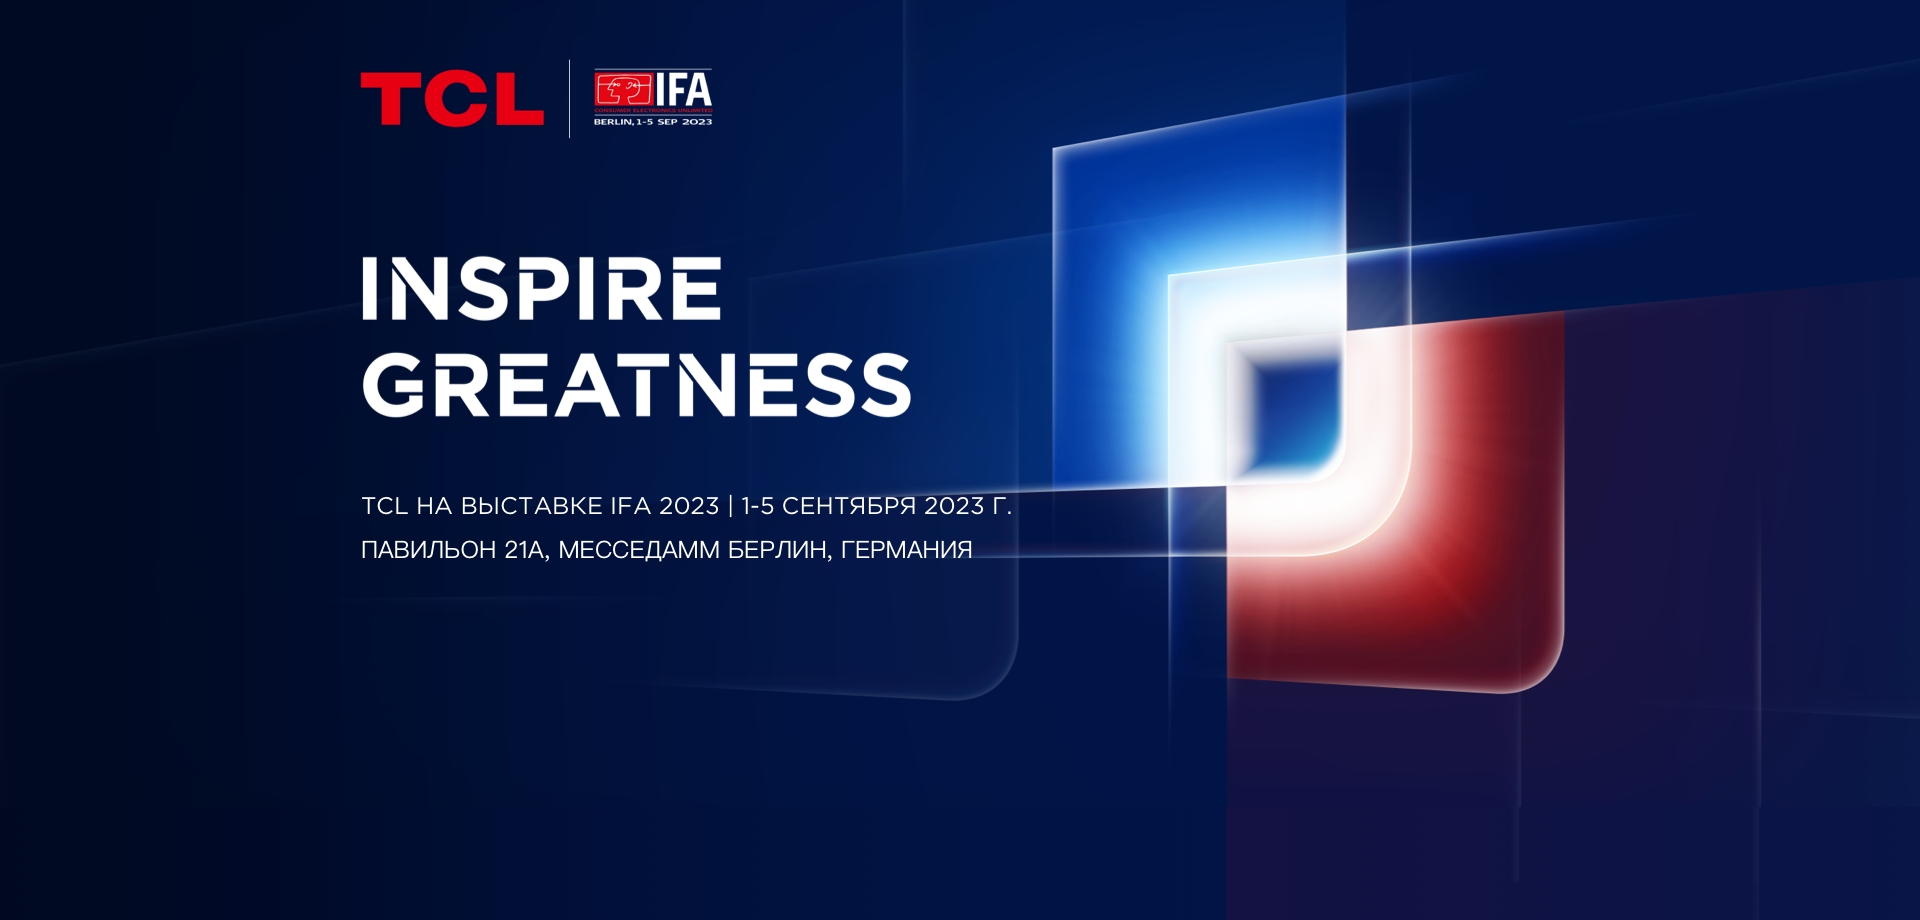 TCL Inspire Greatness